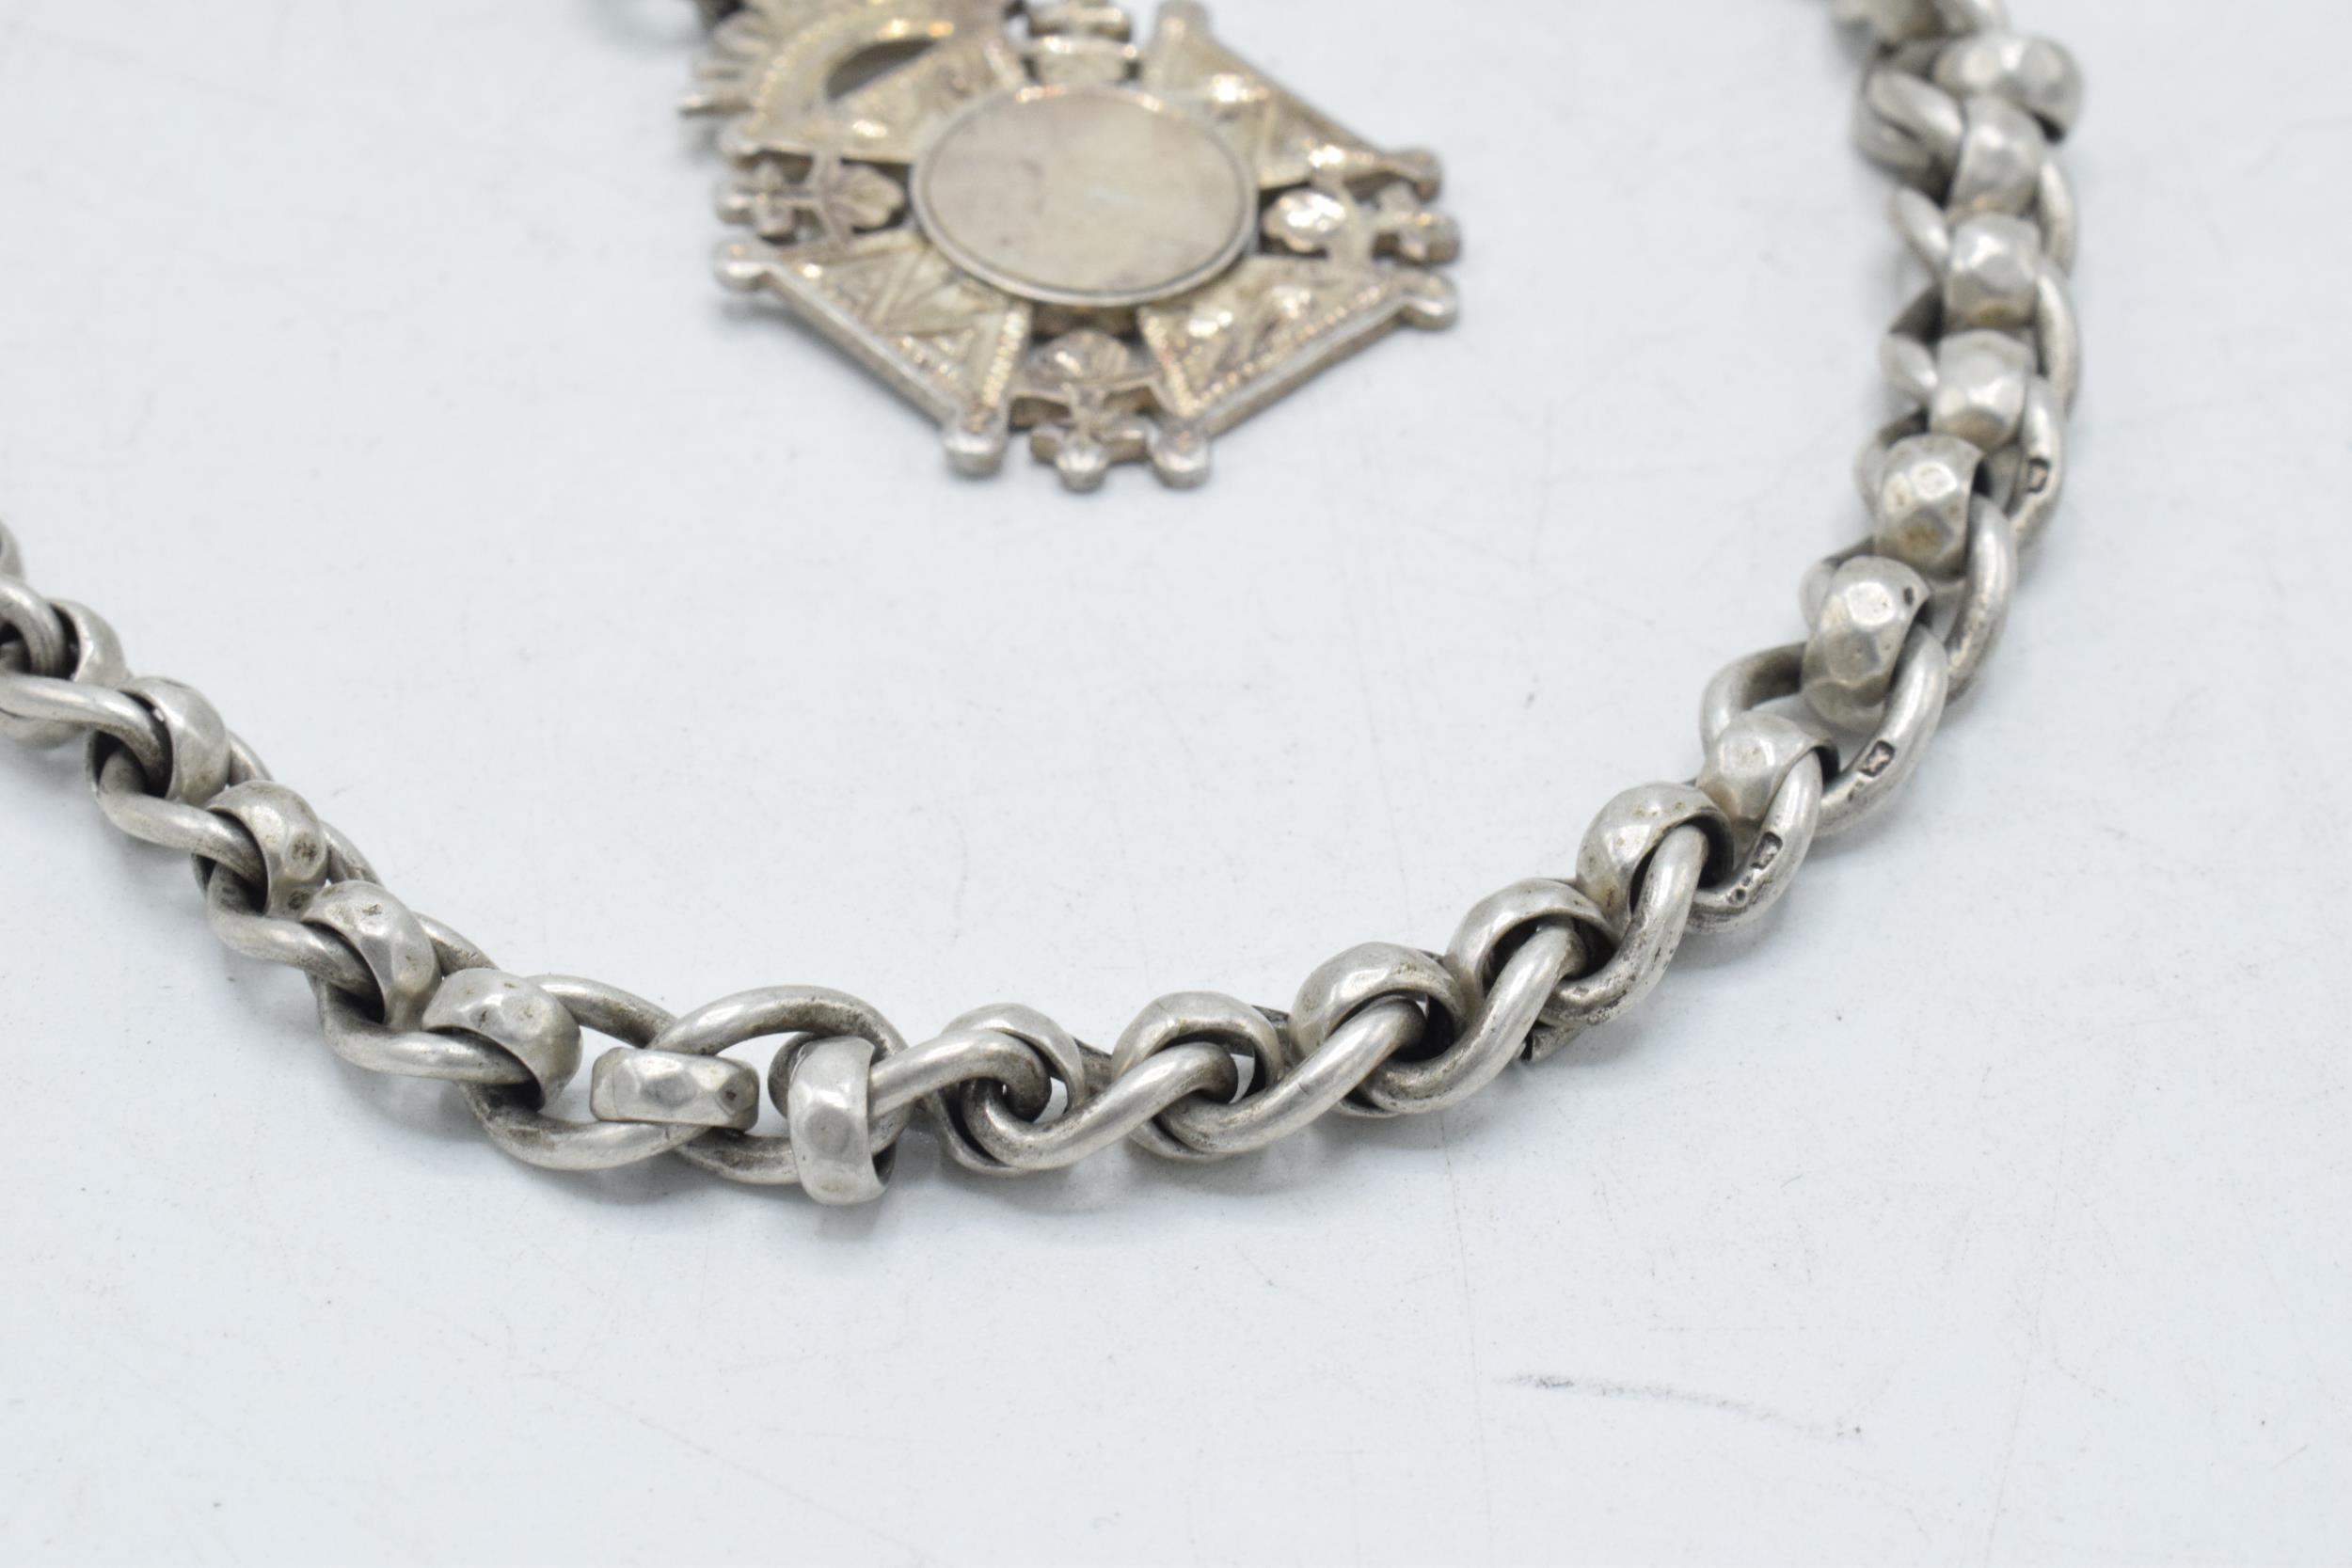 Hallmarked silver Albert pocket watch chain with hallmarked T-bar and fob, 45.8 grams, 41cm long. - Image 3 of 3